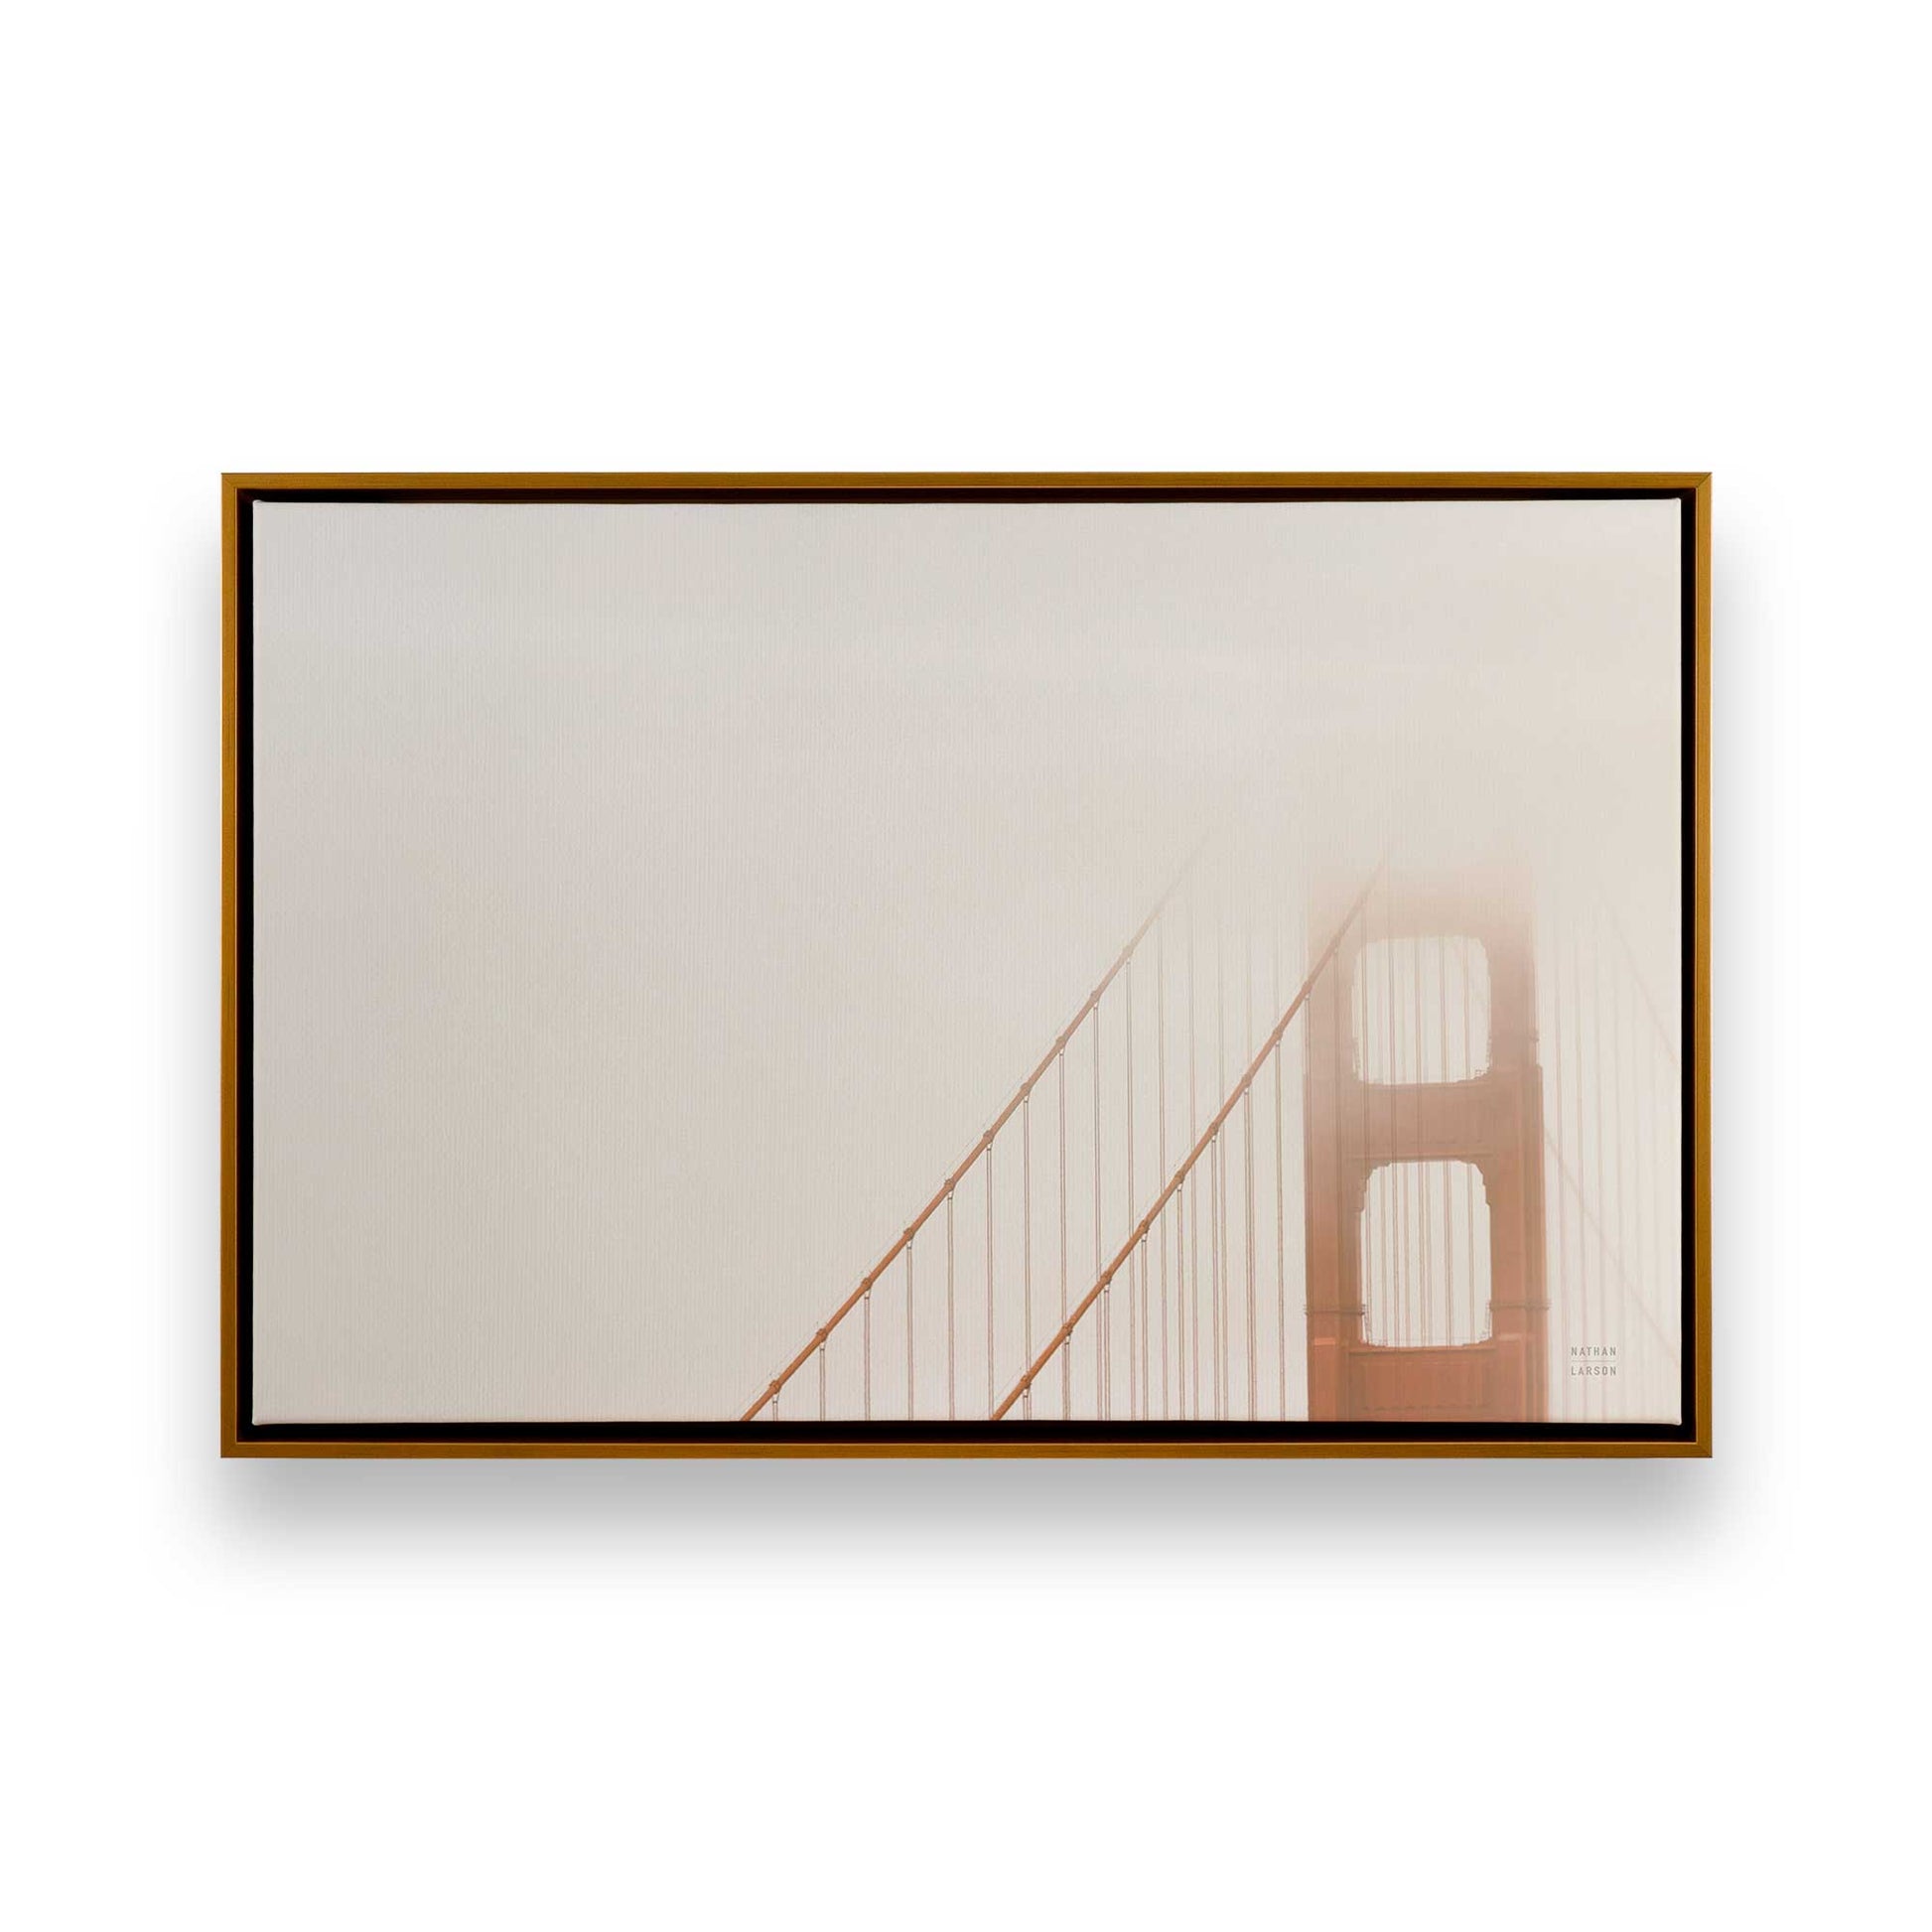 [Color:Polished Gold] Picture of art in a Polished Gold frame